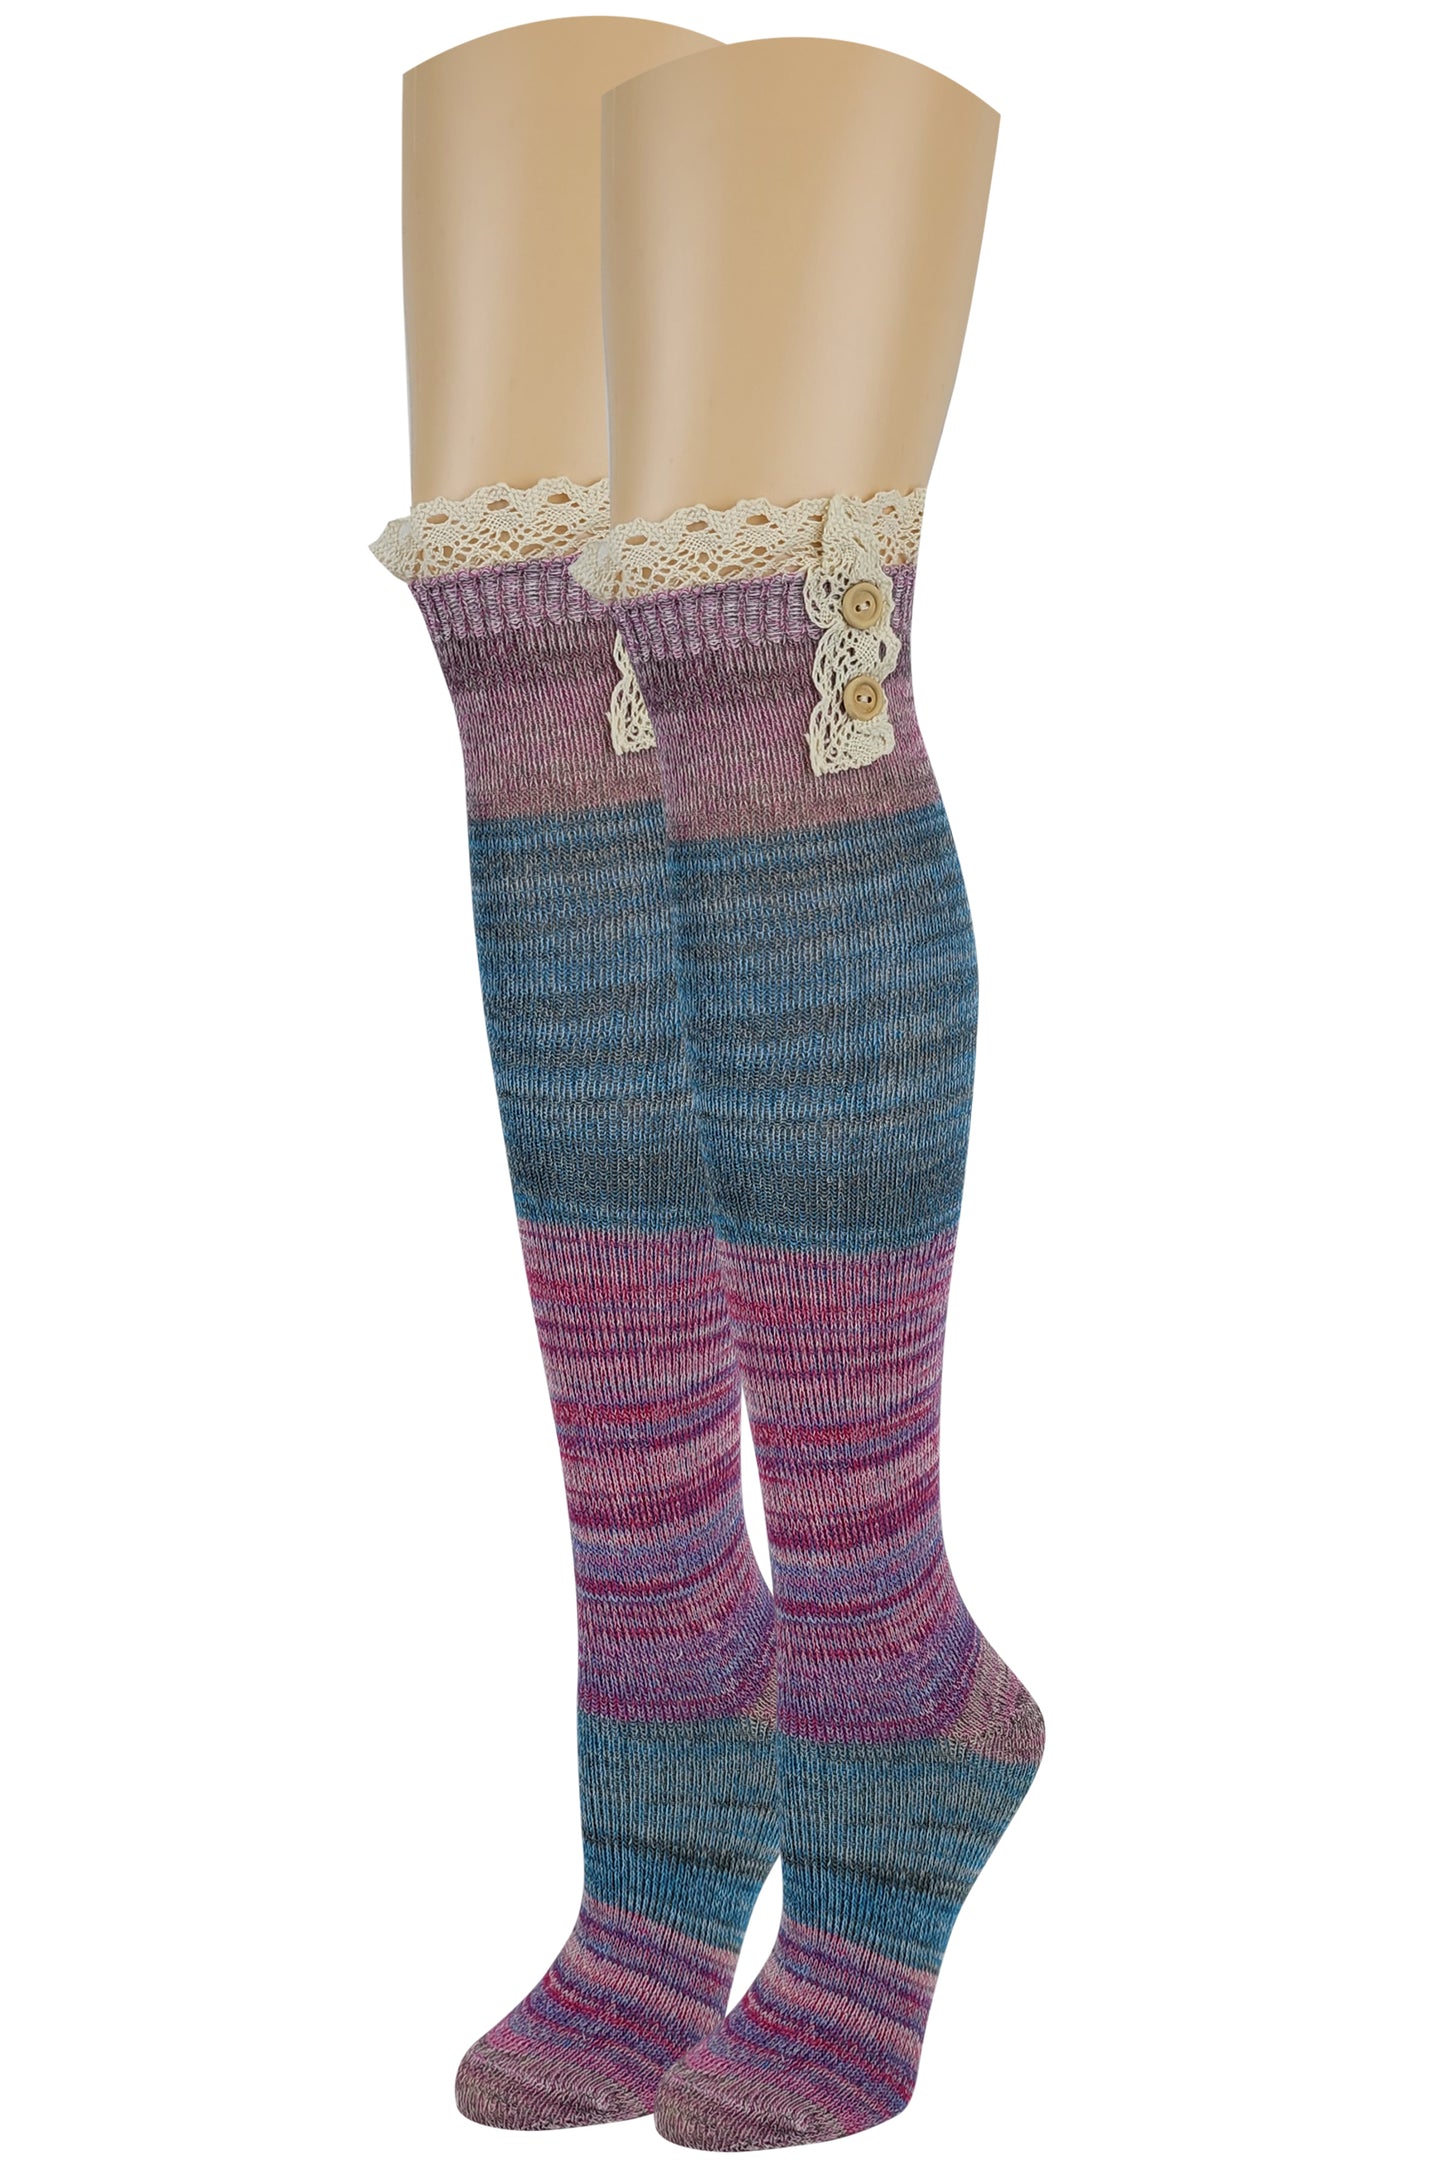 4 Pairs Women Sumona Assorted Color Over the Knee Socks with Buttons and Lace